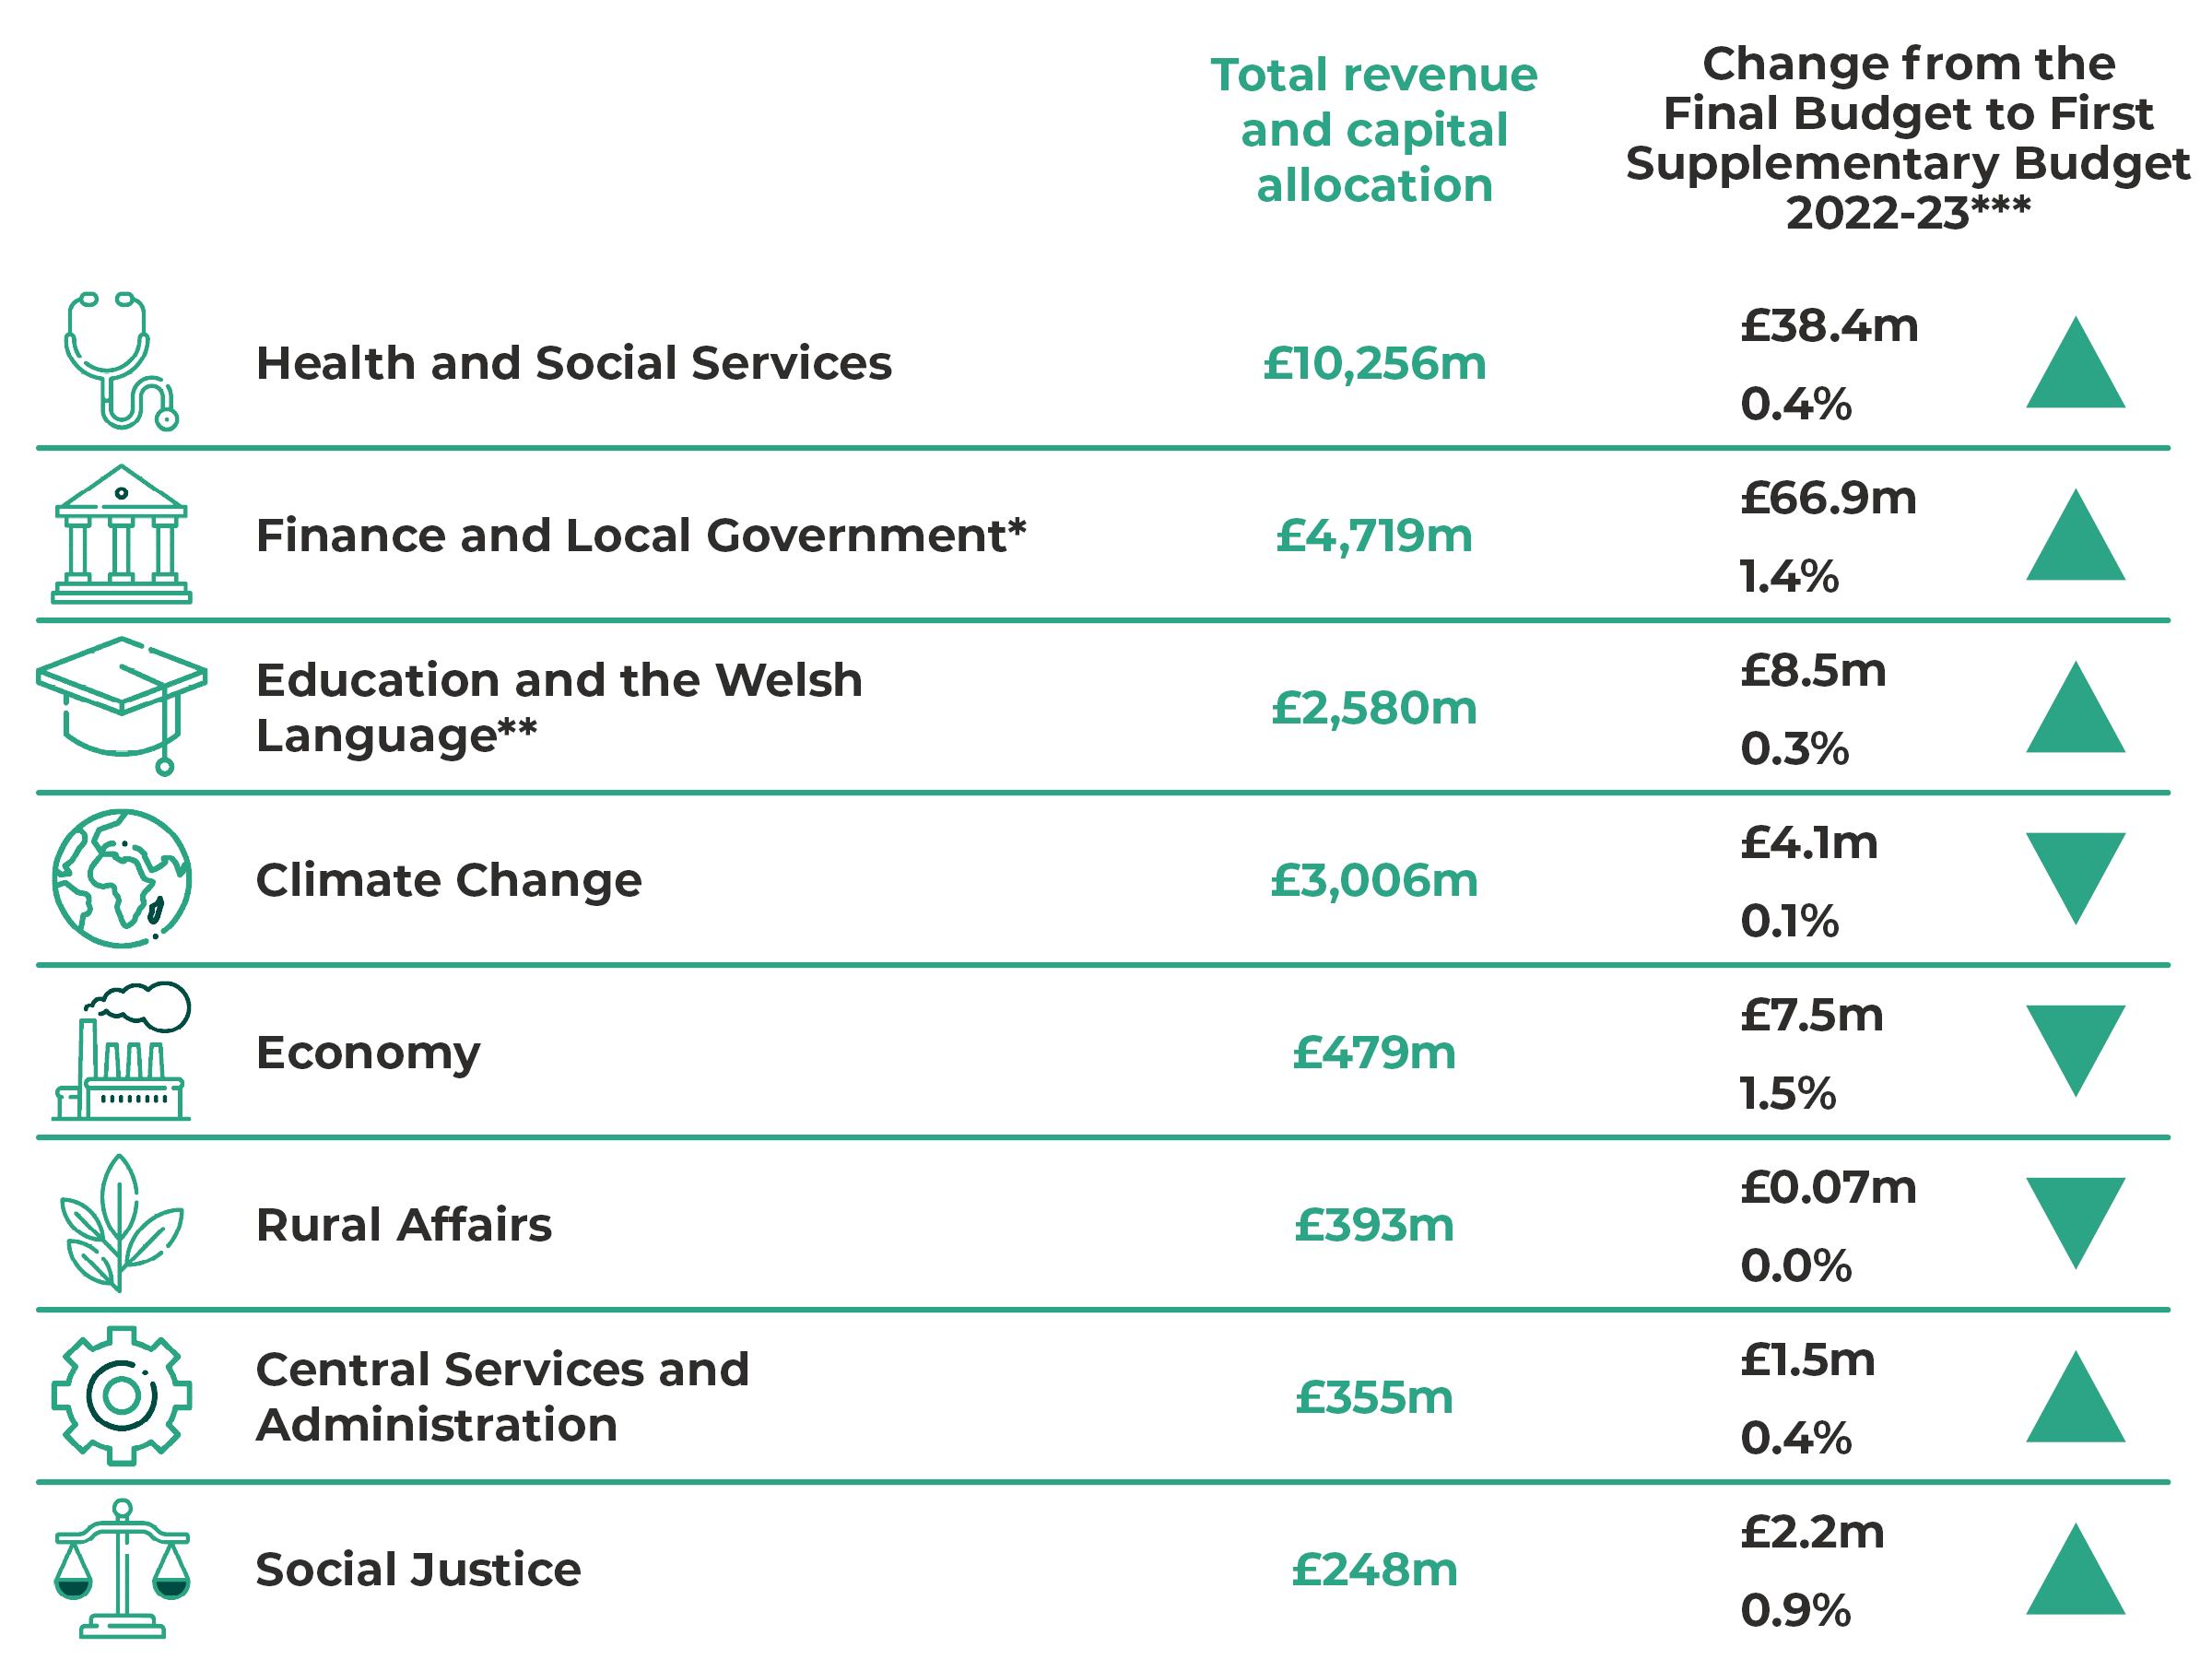 Table of total revenue and capital allocation by department. Health and Social Services: £10256m (up by £38.4m or 0.4%). Finance and Local Government: £4719m (up by £66.9m or 1.4%). Education and the Welsh Language: £2580m (up by £8.5m or 0.3%). Climate Change: £3006m (down by £4.1m or 0.1%). Economy: £479m (down by £7.5m or 1.5%). Rural Affairs: £393m (down by £0.07m). Social Justice: £248m (up by £2.2m or 0.9%). Central Services and Administration: £355m (up by £1.5m or 0.4%).